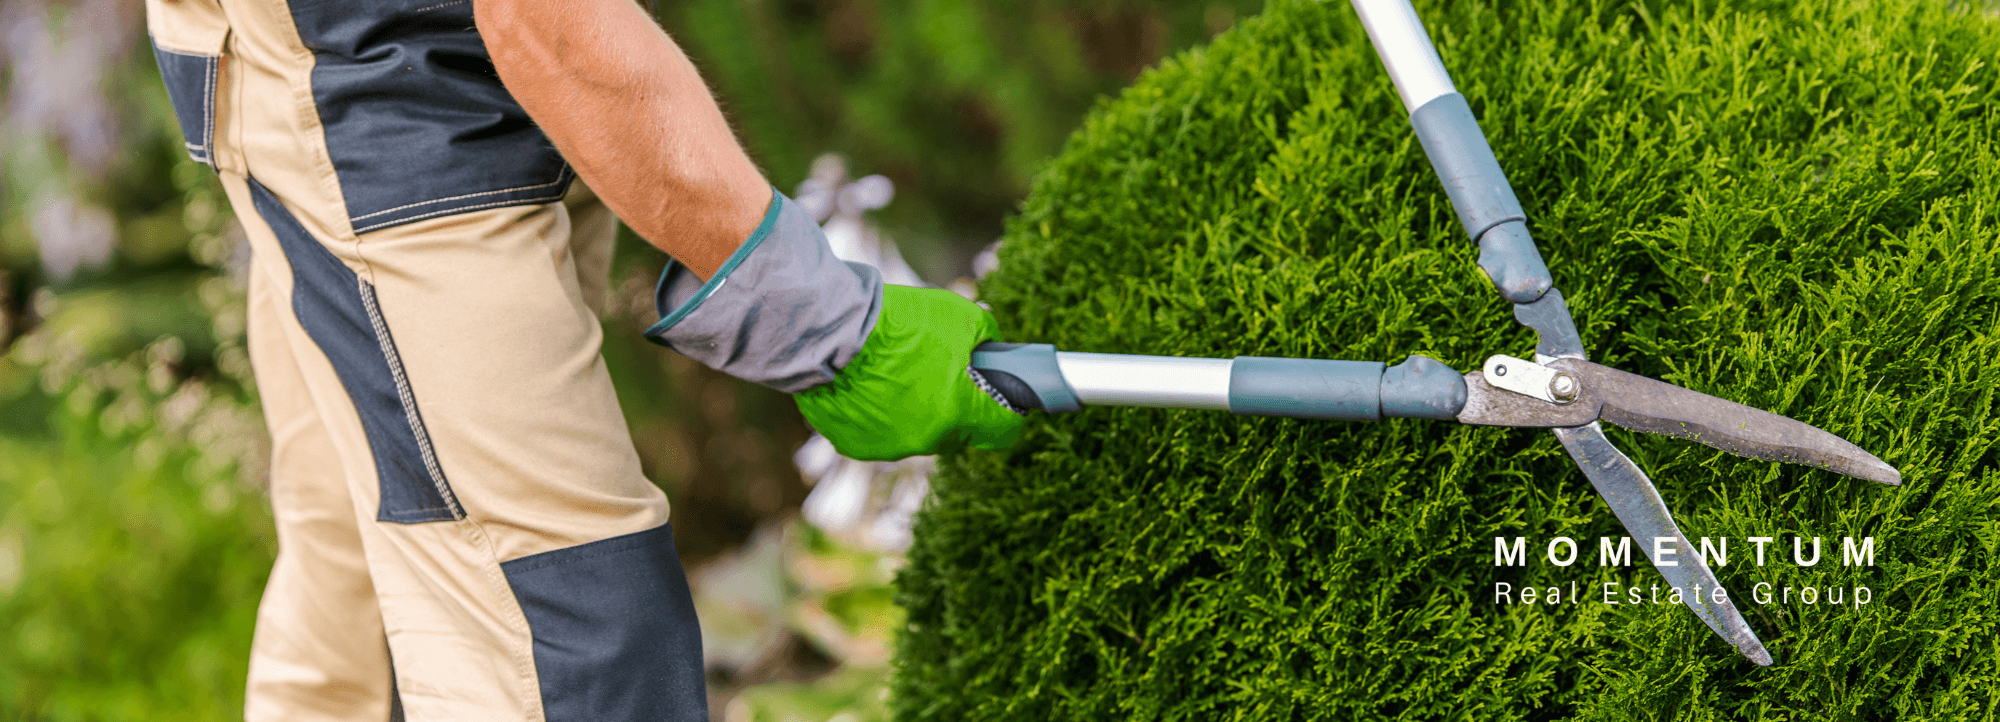 Home Maintenance | Keep Trees & Shrubs 2 Feet From Your Home